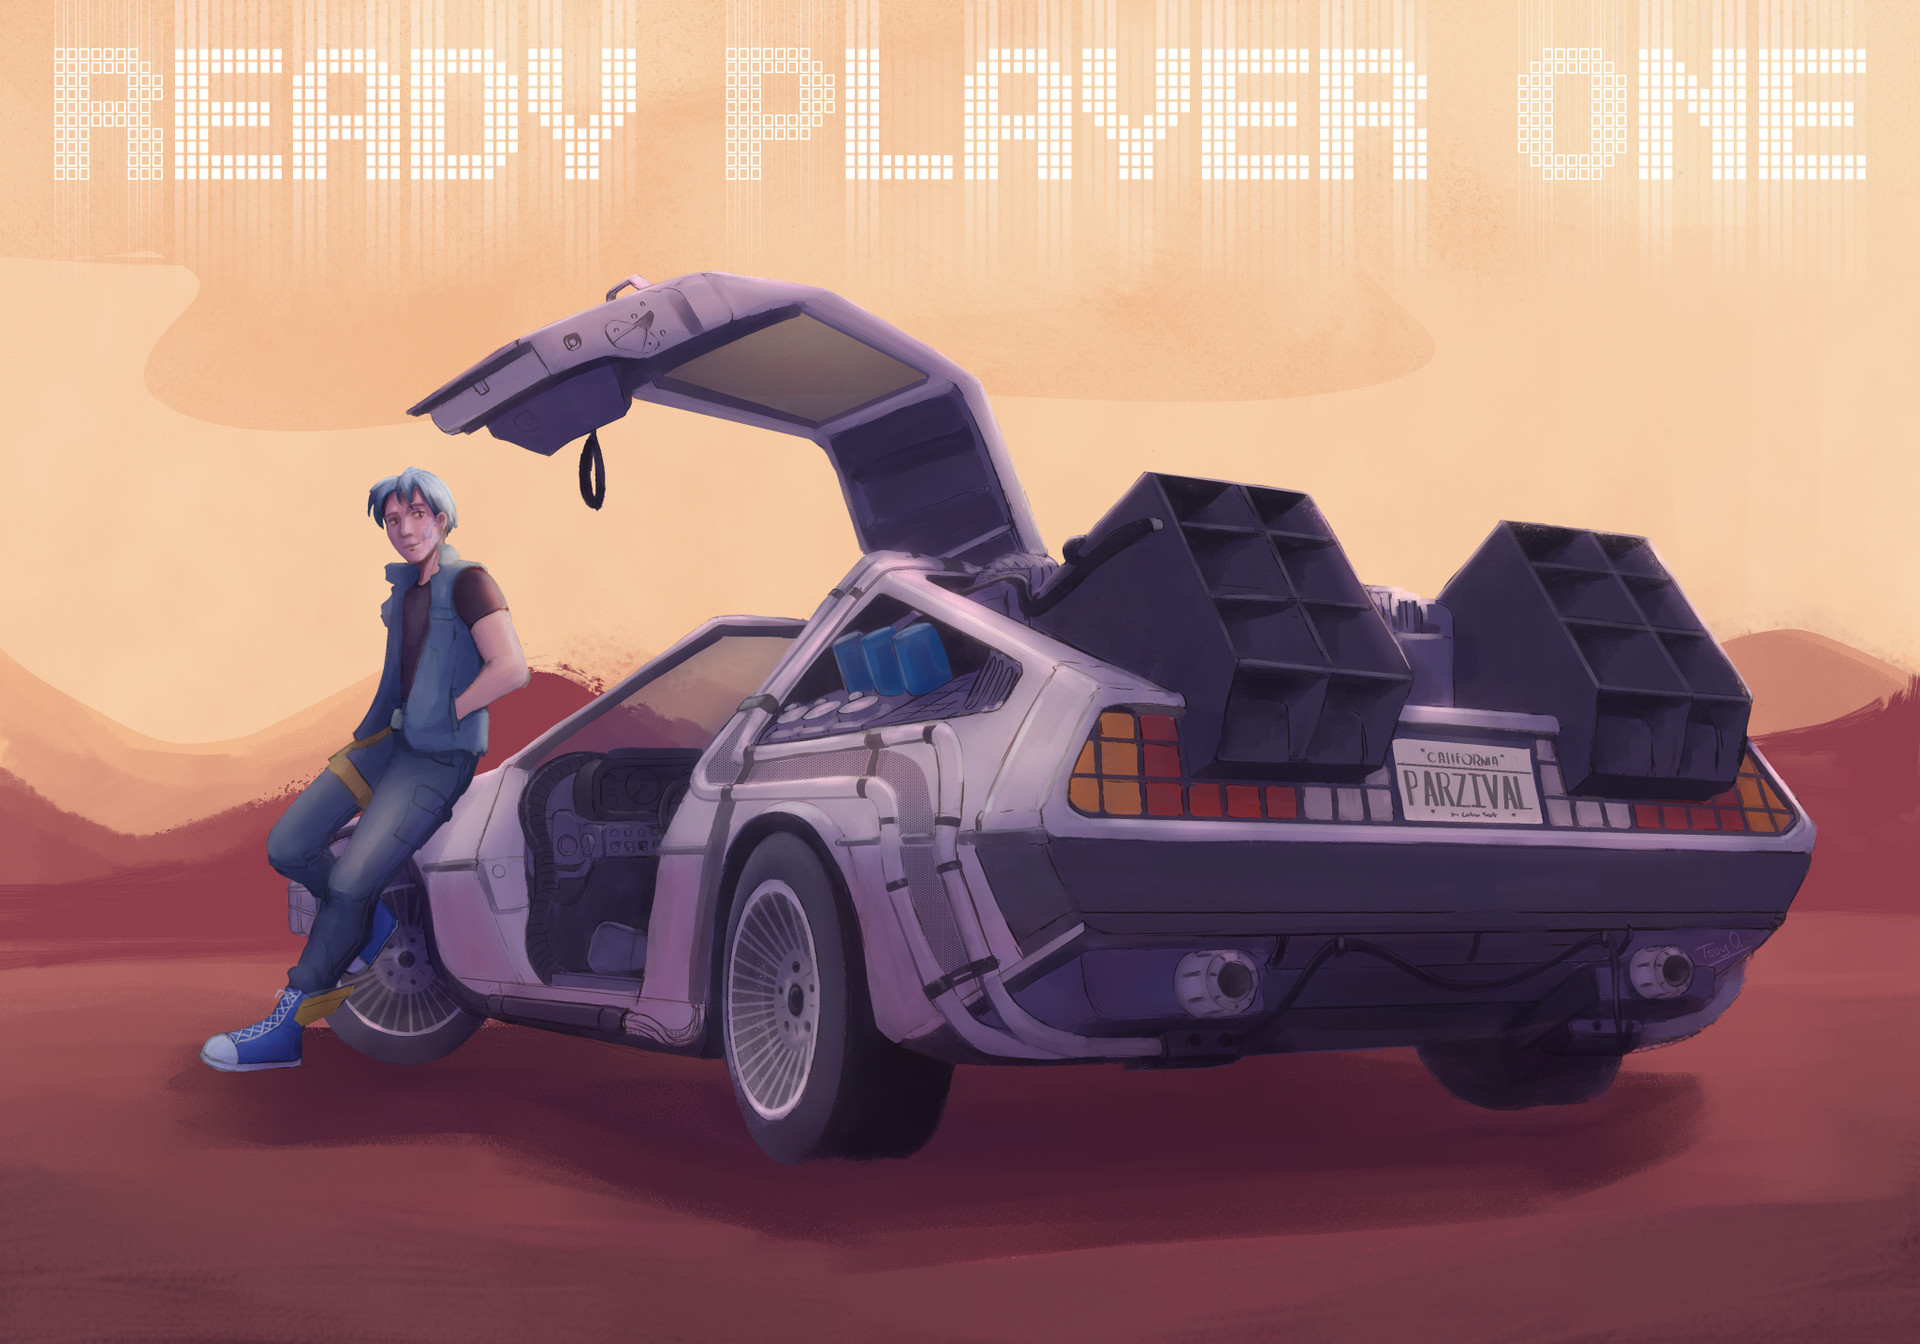 General 1920x1344 Ready player one science fiction retro theme books DeLorean American cars Book characters